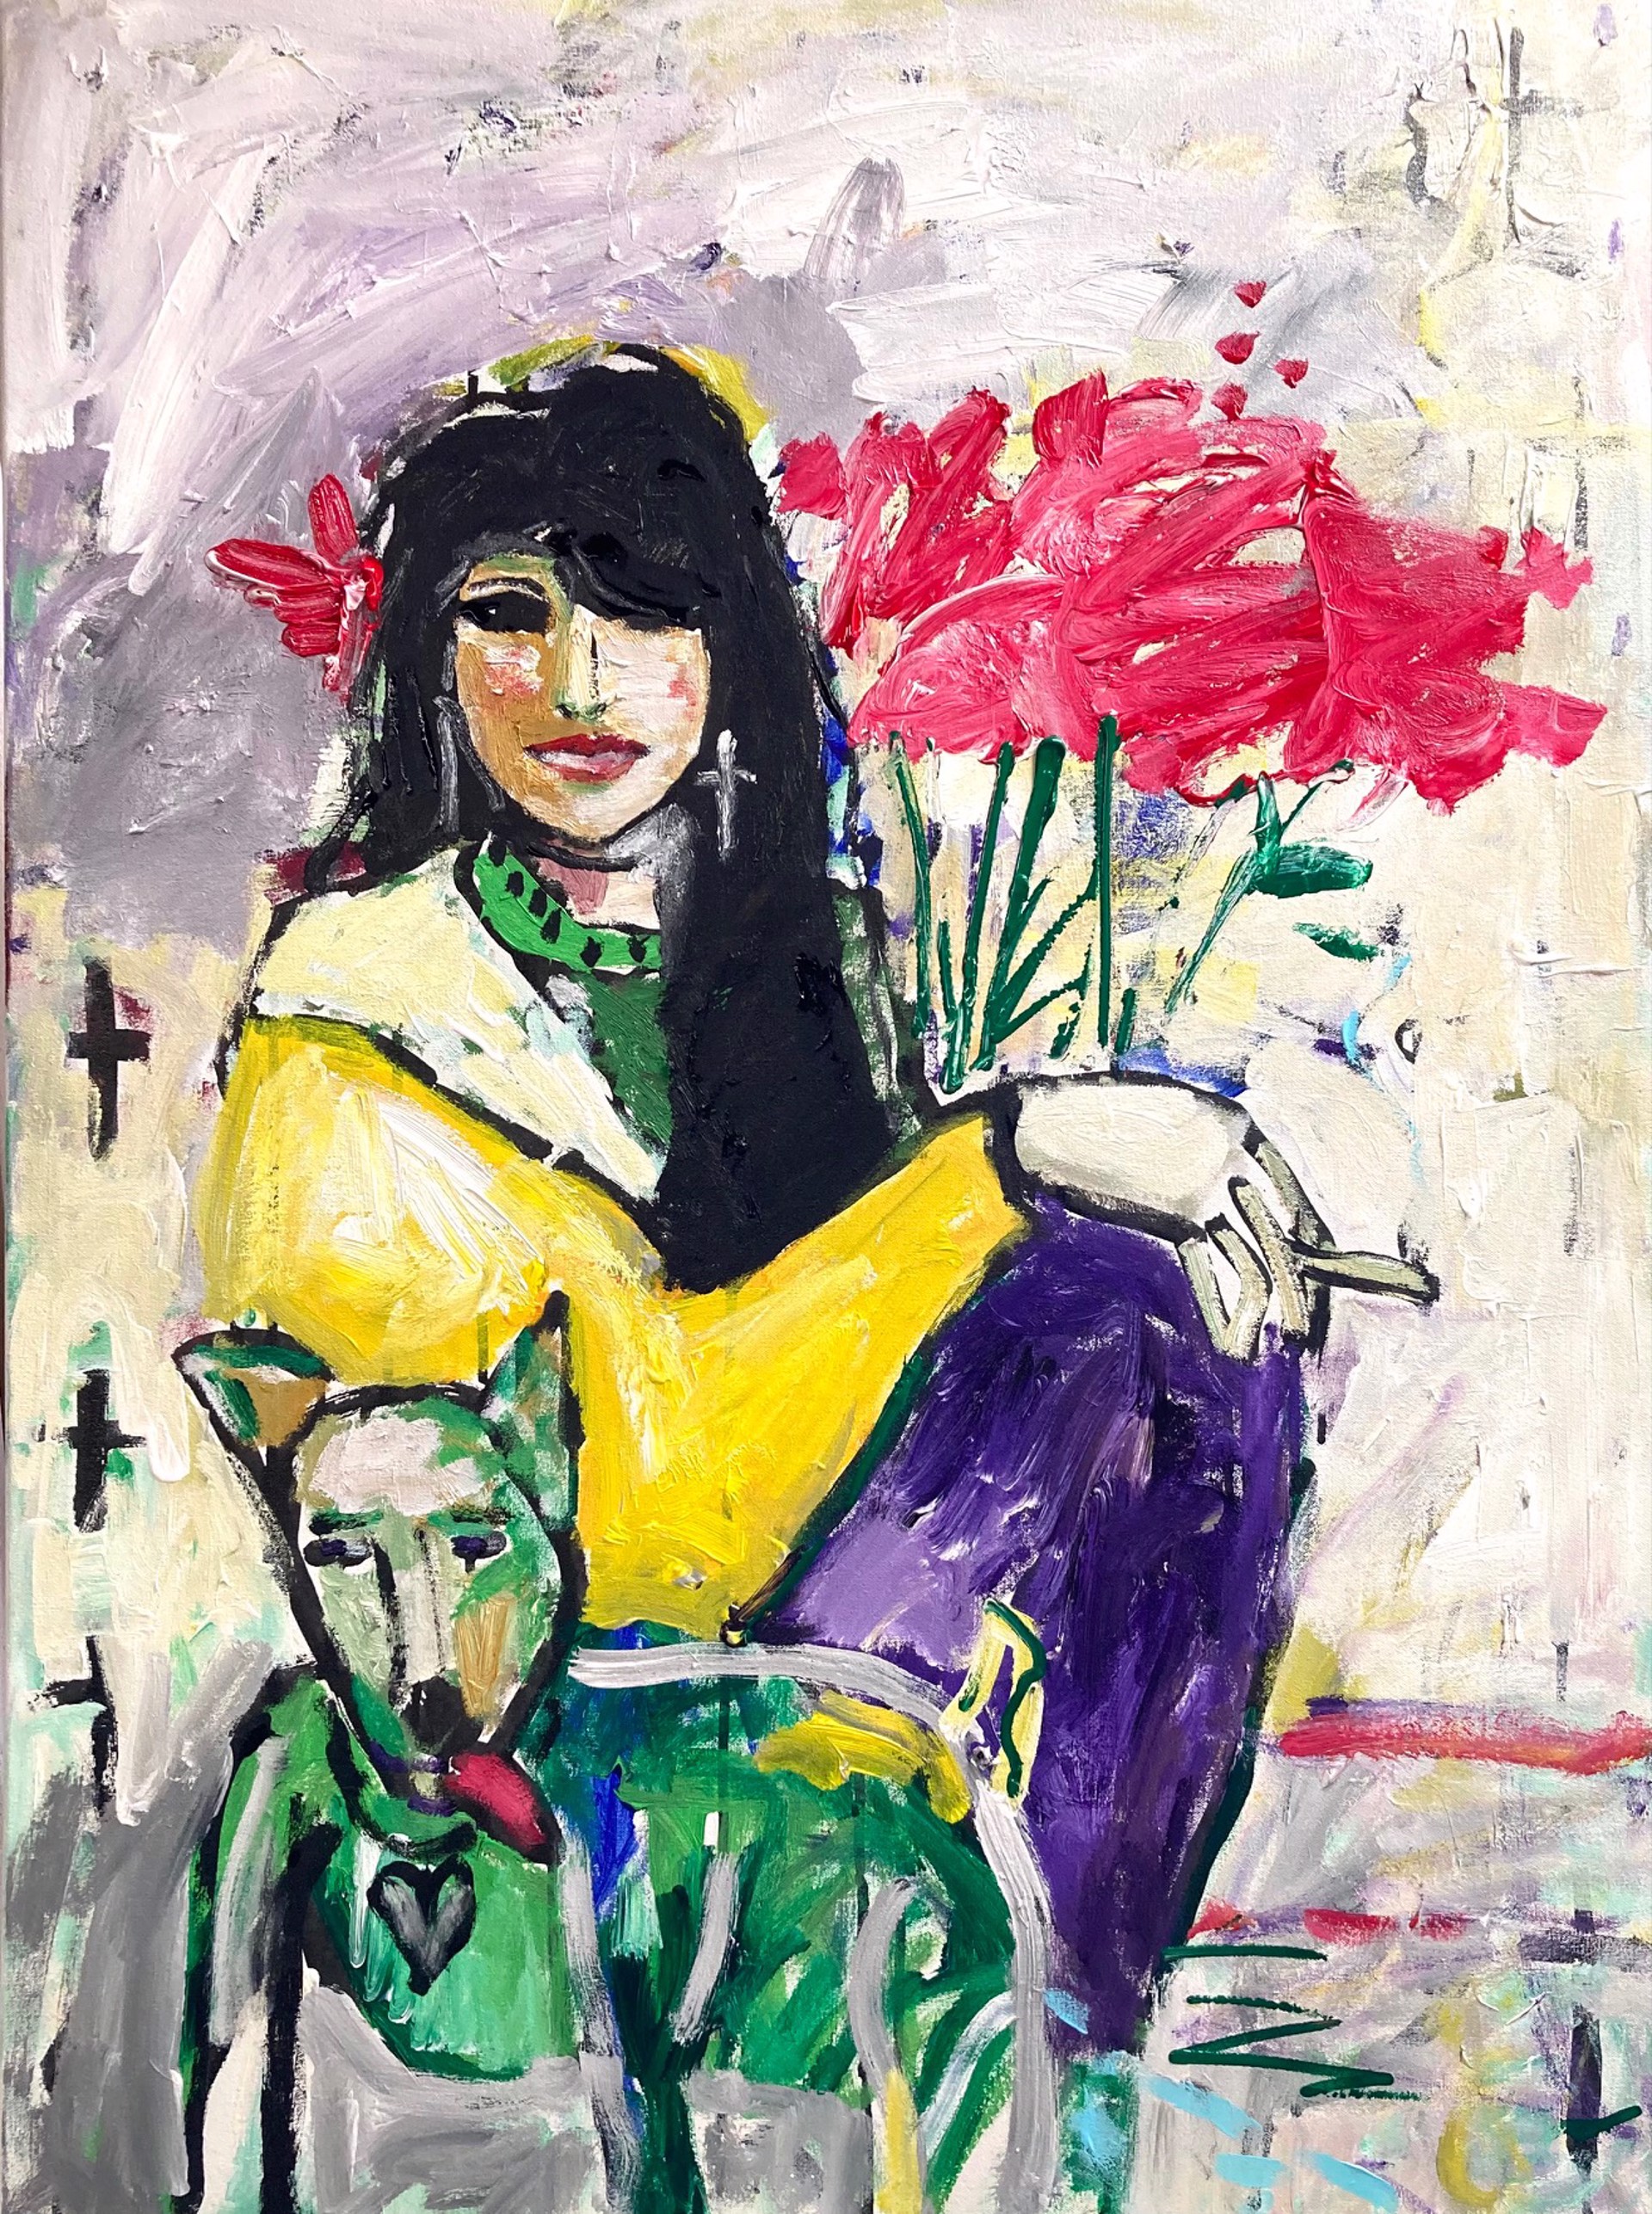 Girl with Roses sold by Brad Smith